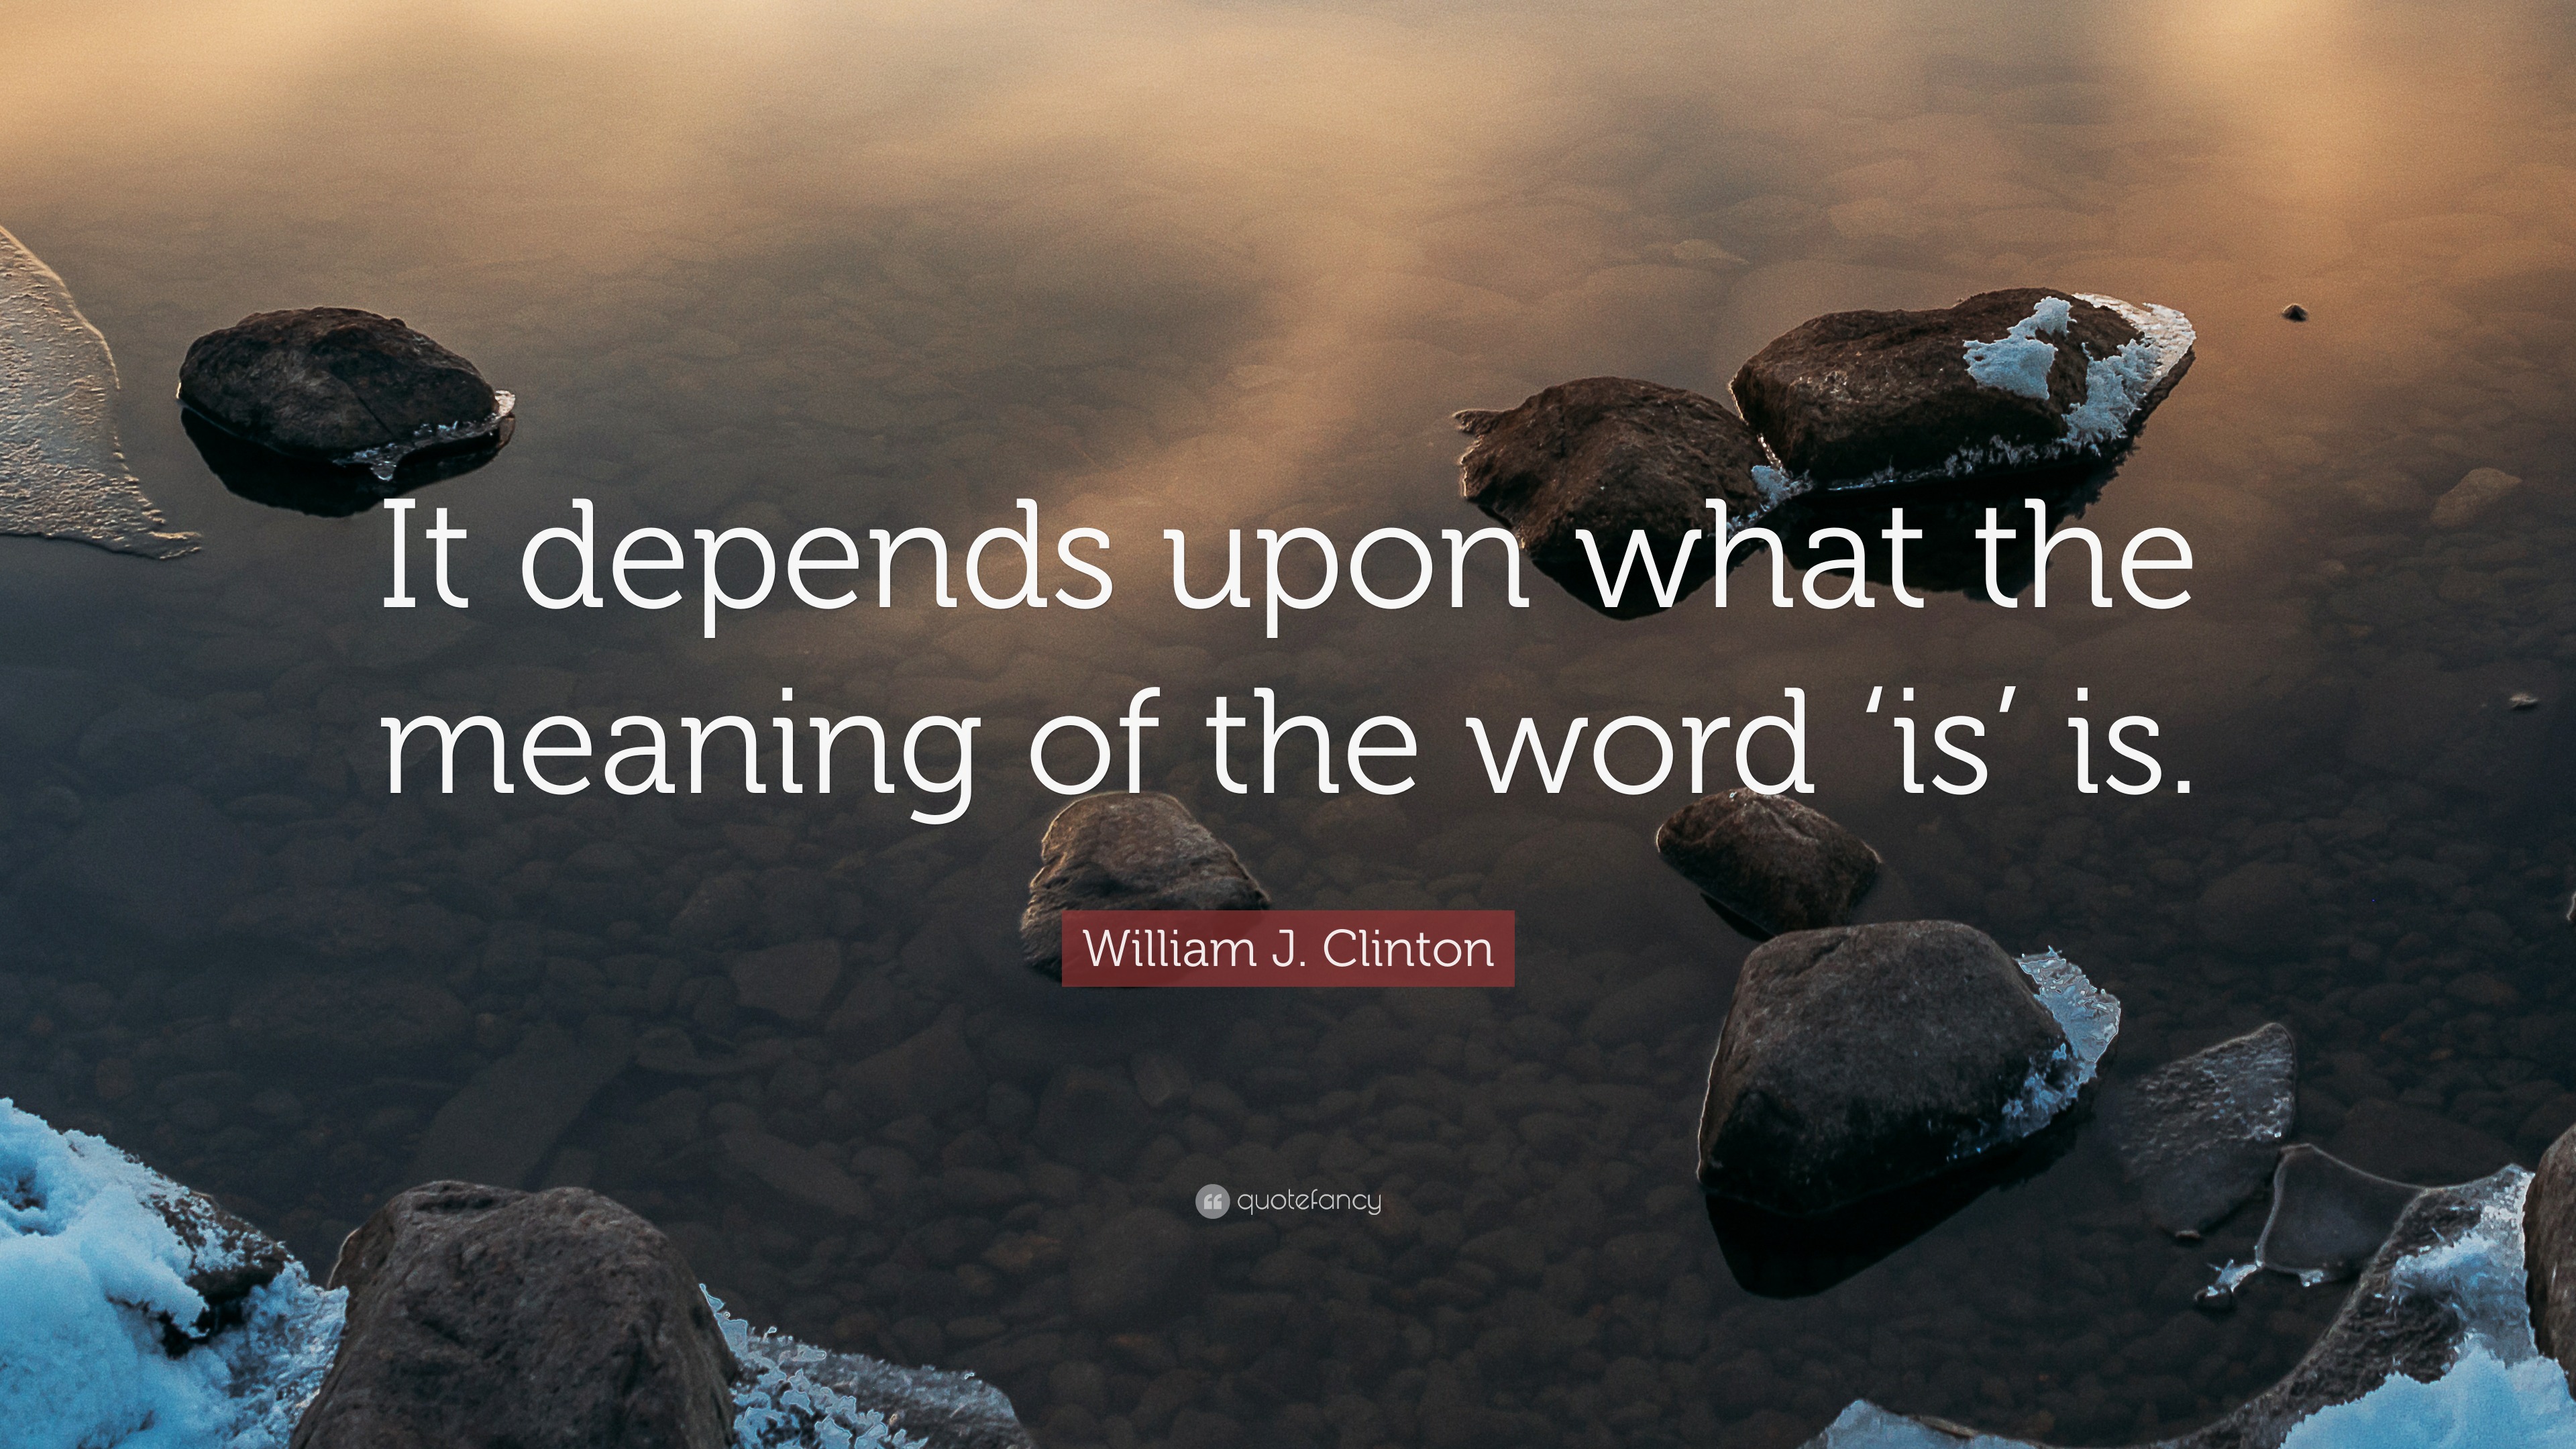 William J. Clinton Quote: “It depends upon what the meaning of the ...